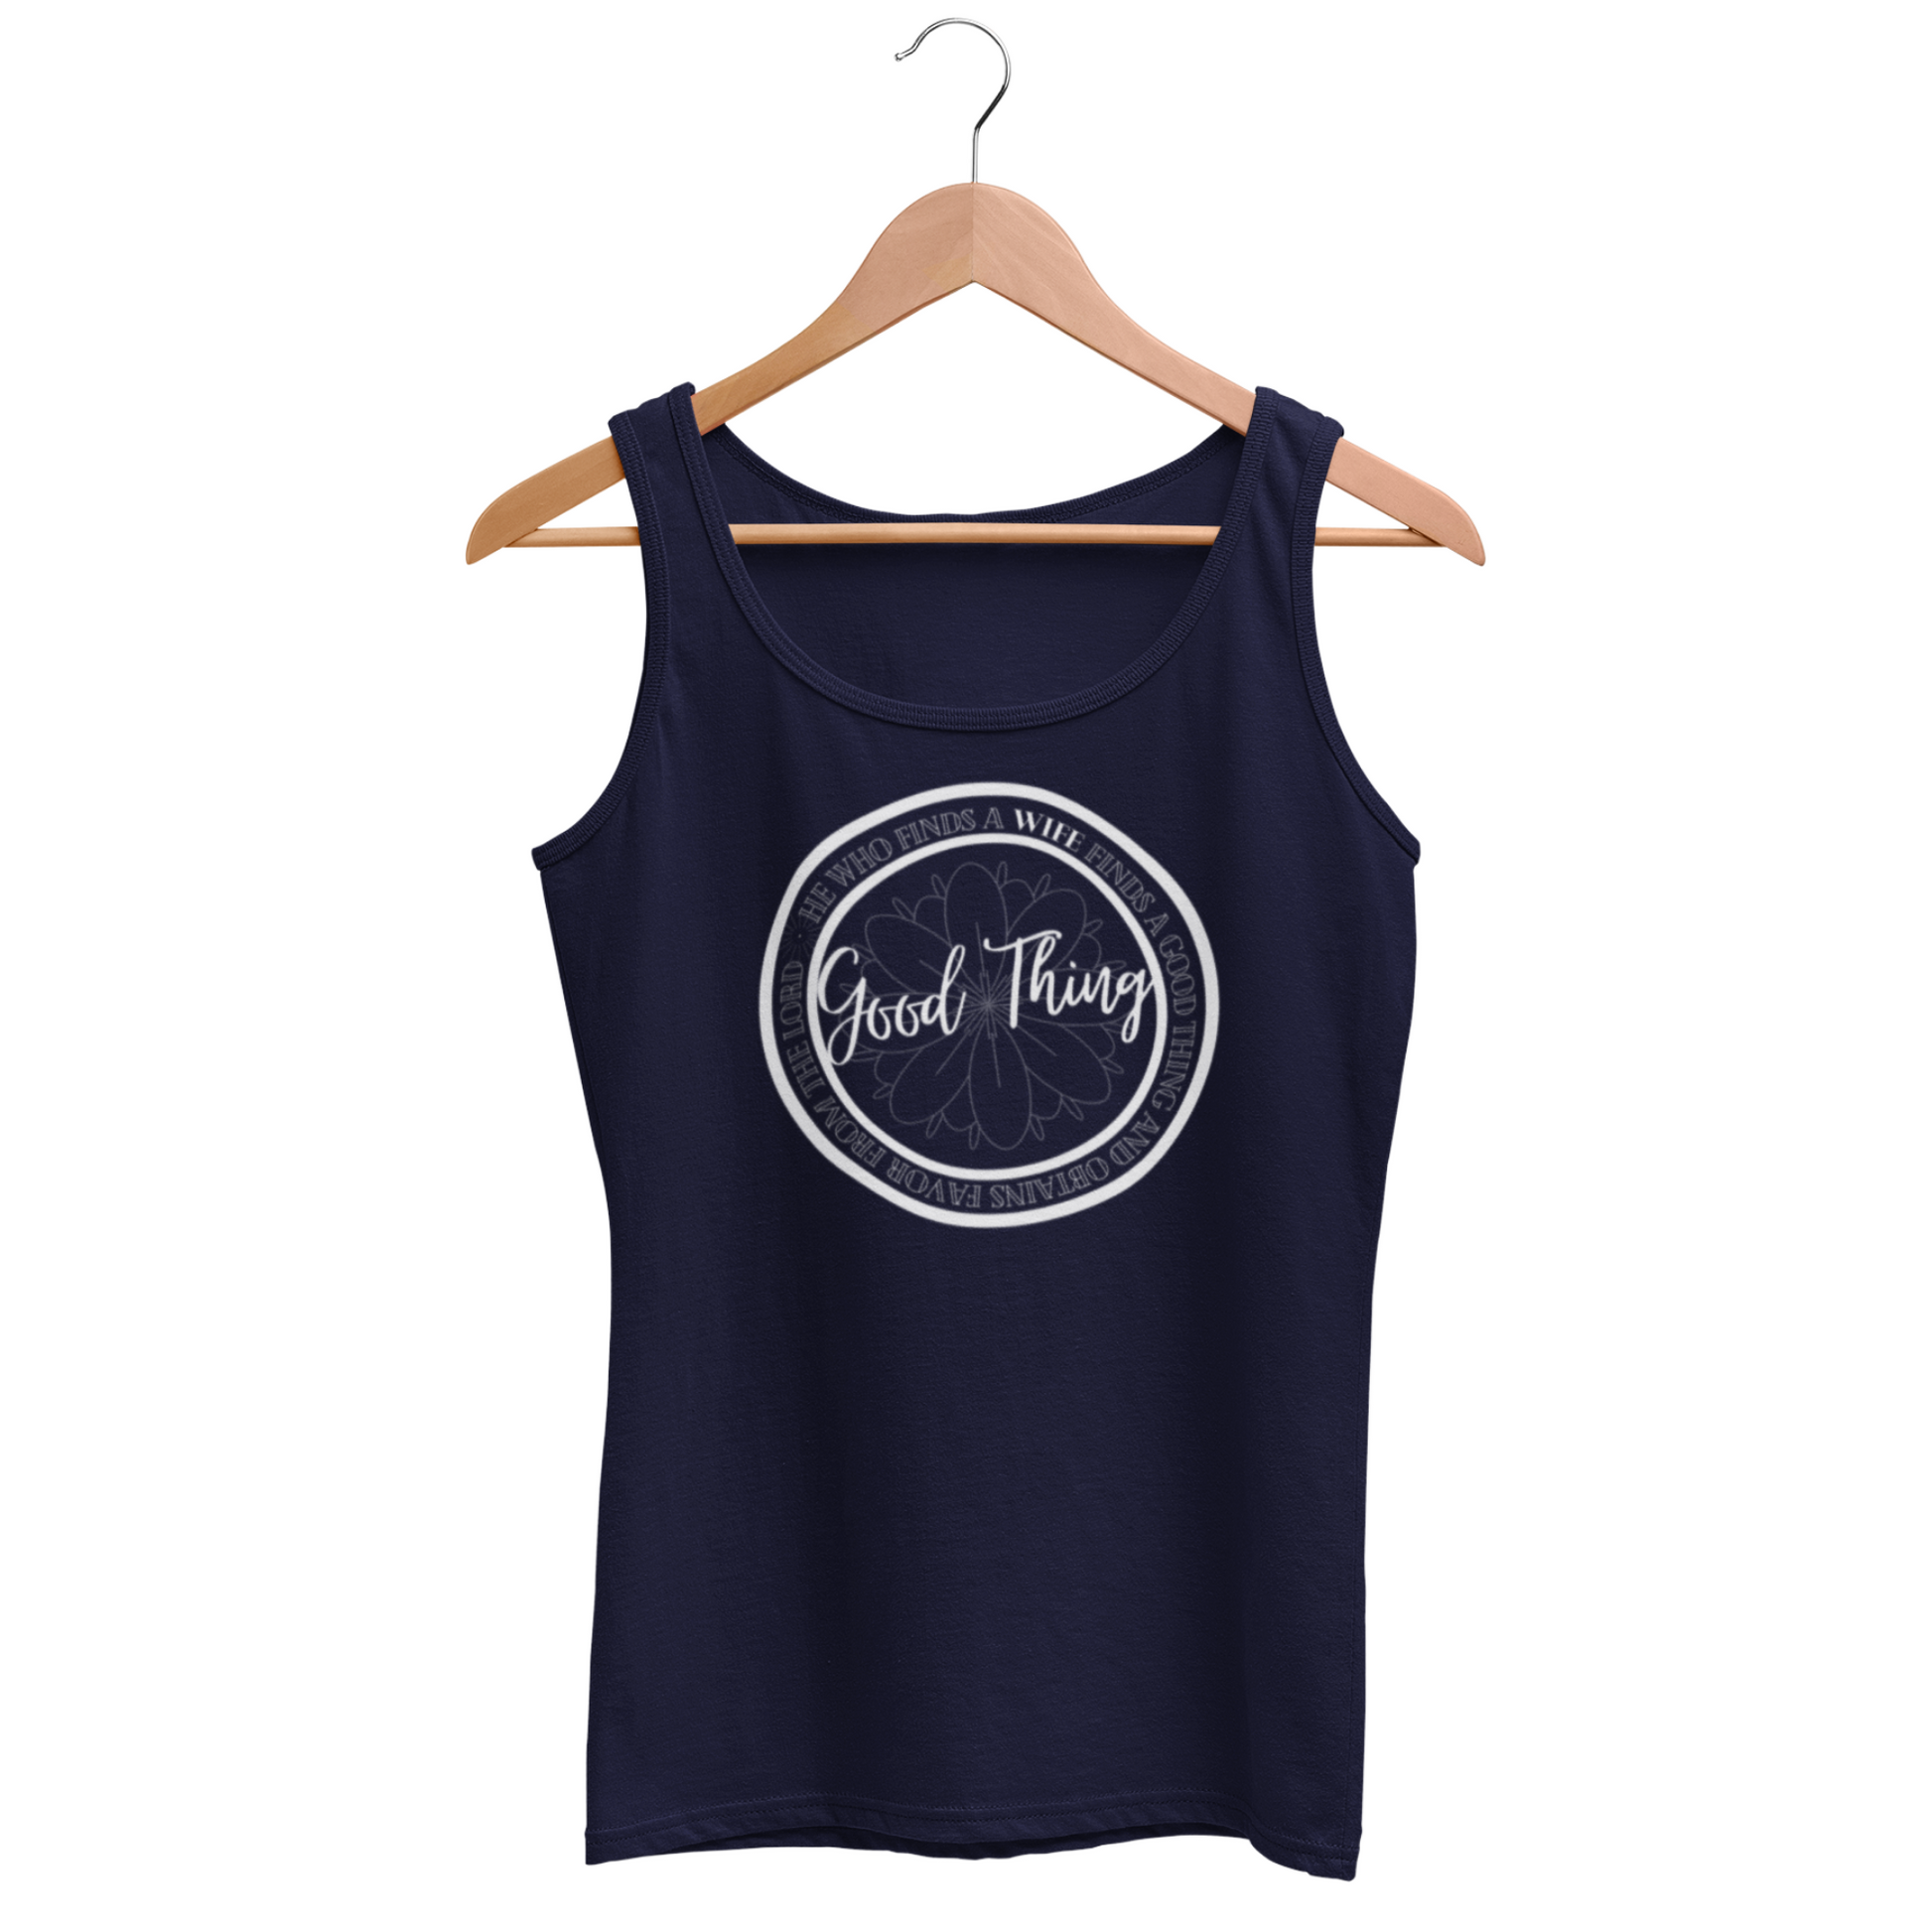 Good Thing Women's Christian Tank T-shirt. Perfect for saved women who believe in the sanctity of marriage. Get yours today and gift one to a friend. Soft comfortable fabric great to wear for a workout or a night on the town. Trendy Navy tank top just in time for the Spring and Summer.